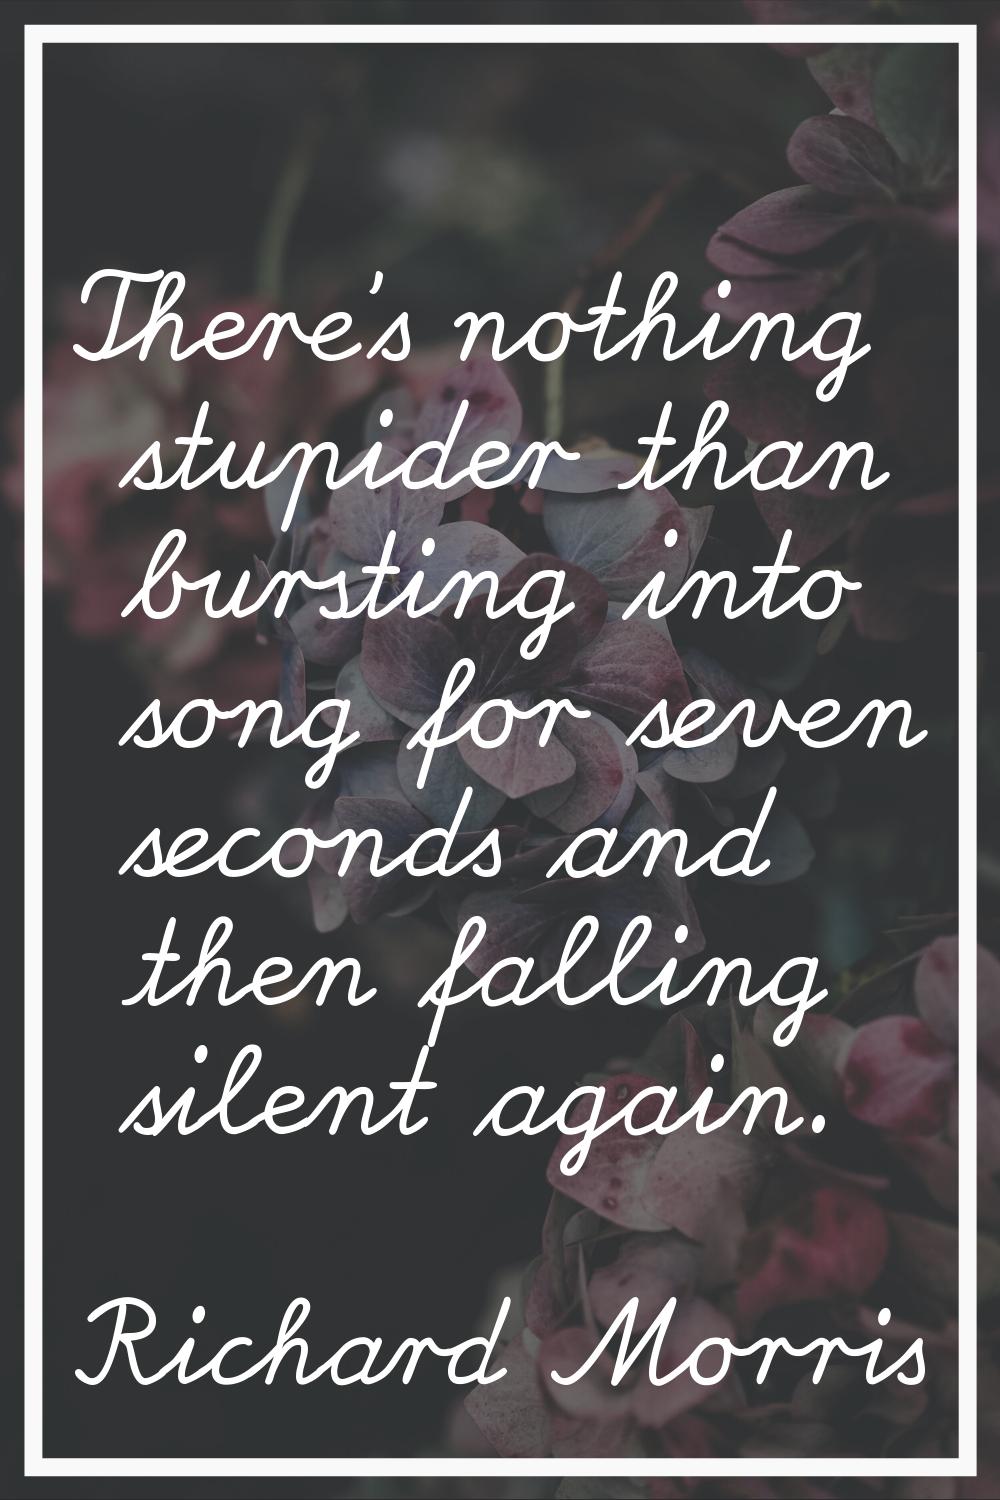 There's nothing stupider than bursting into song for seven seconds and then falling silent again.